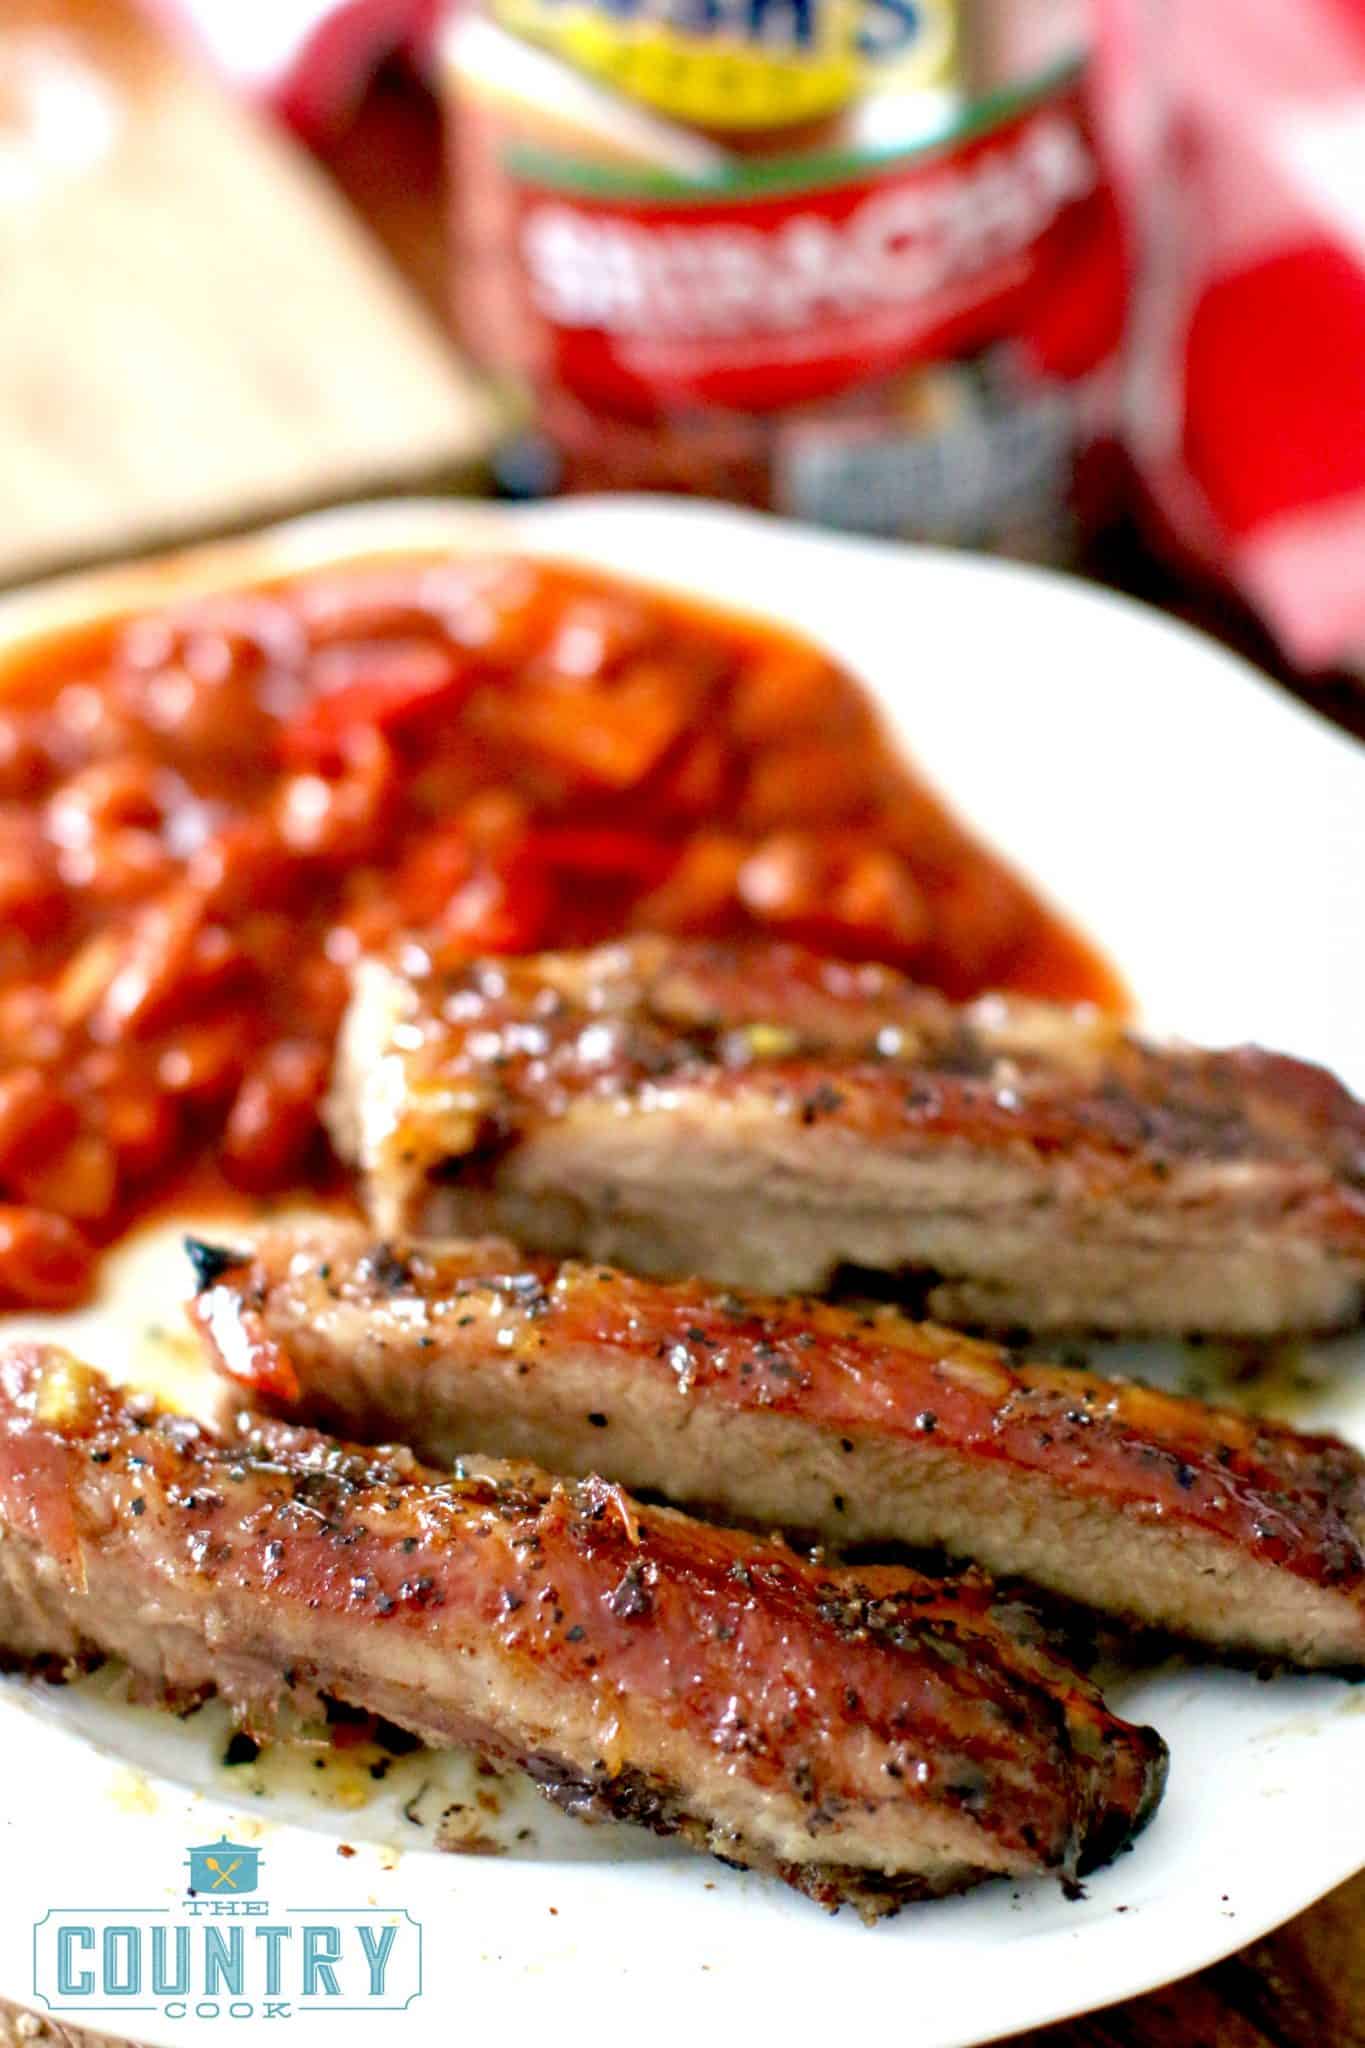 fully cooked rib slices on a plate served with baked beans.